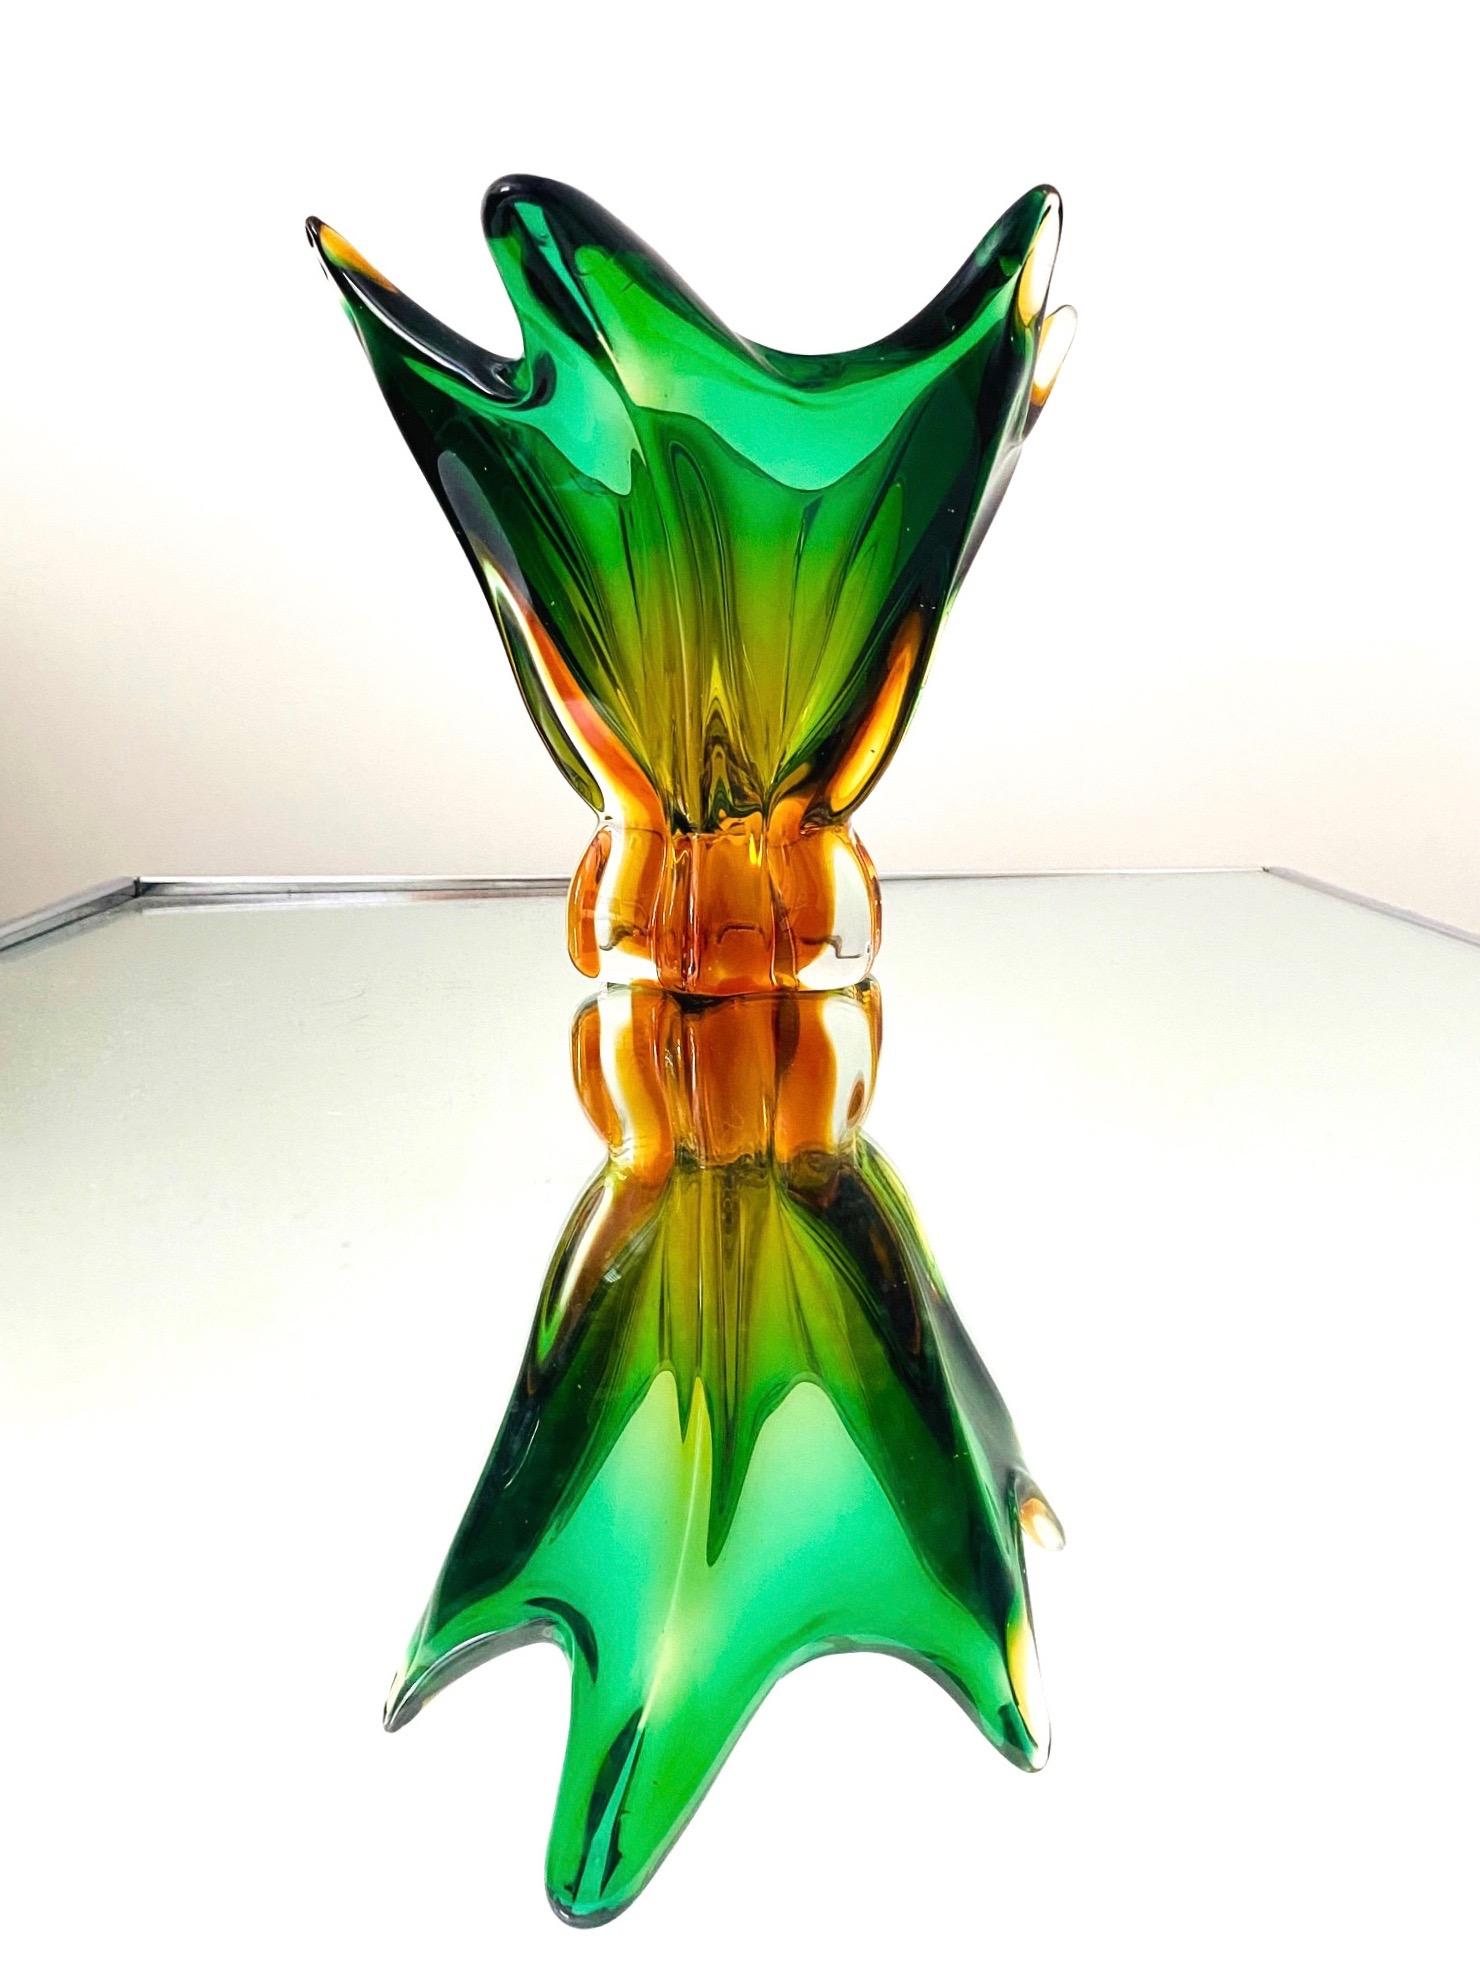 Art Glass Abstract Murano Sommerso Vase or Bowl in Emerald Green & Orange, Italy, c. 1950